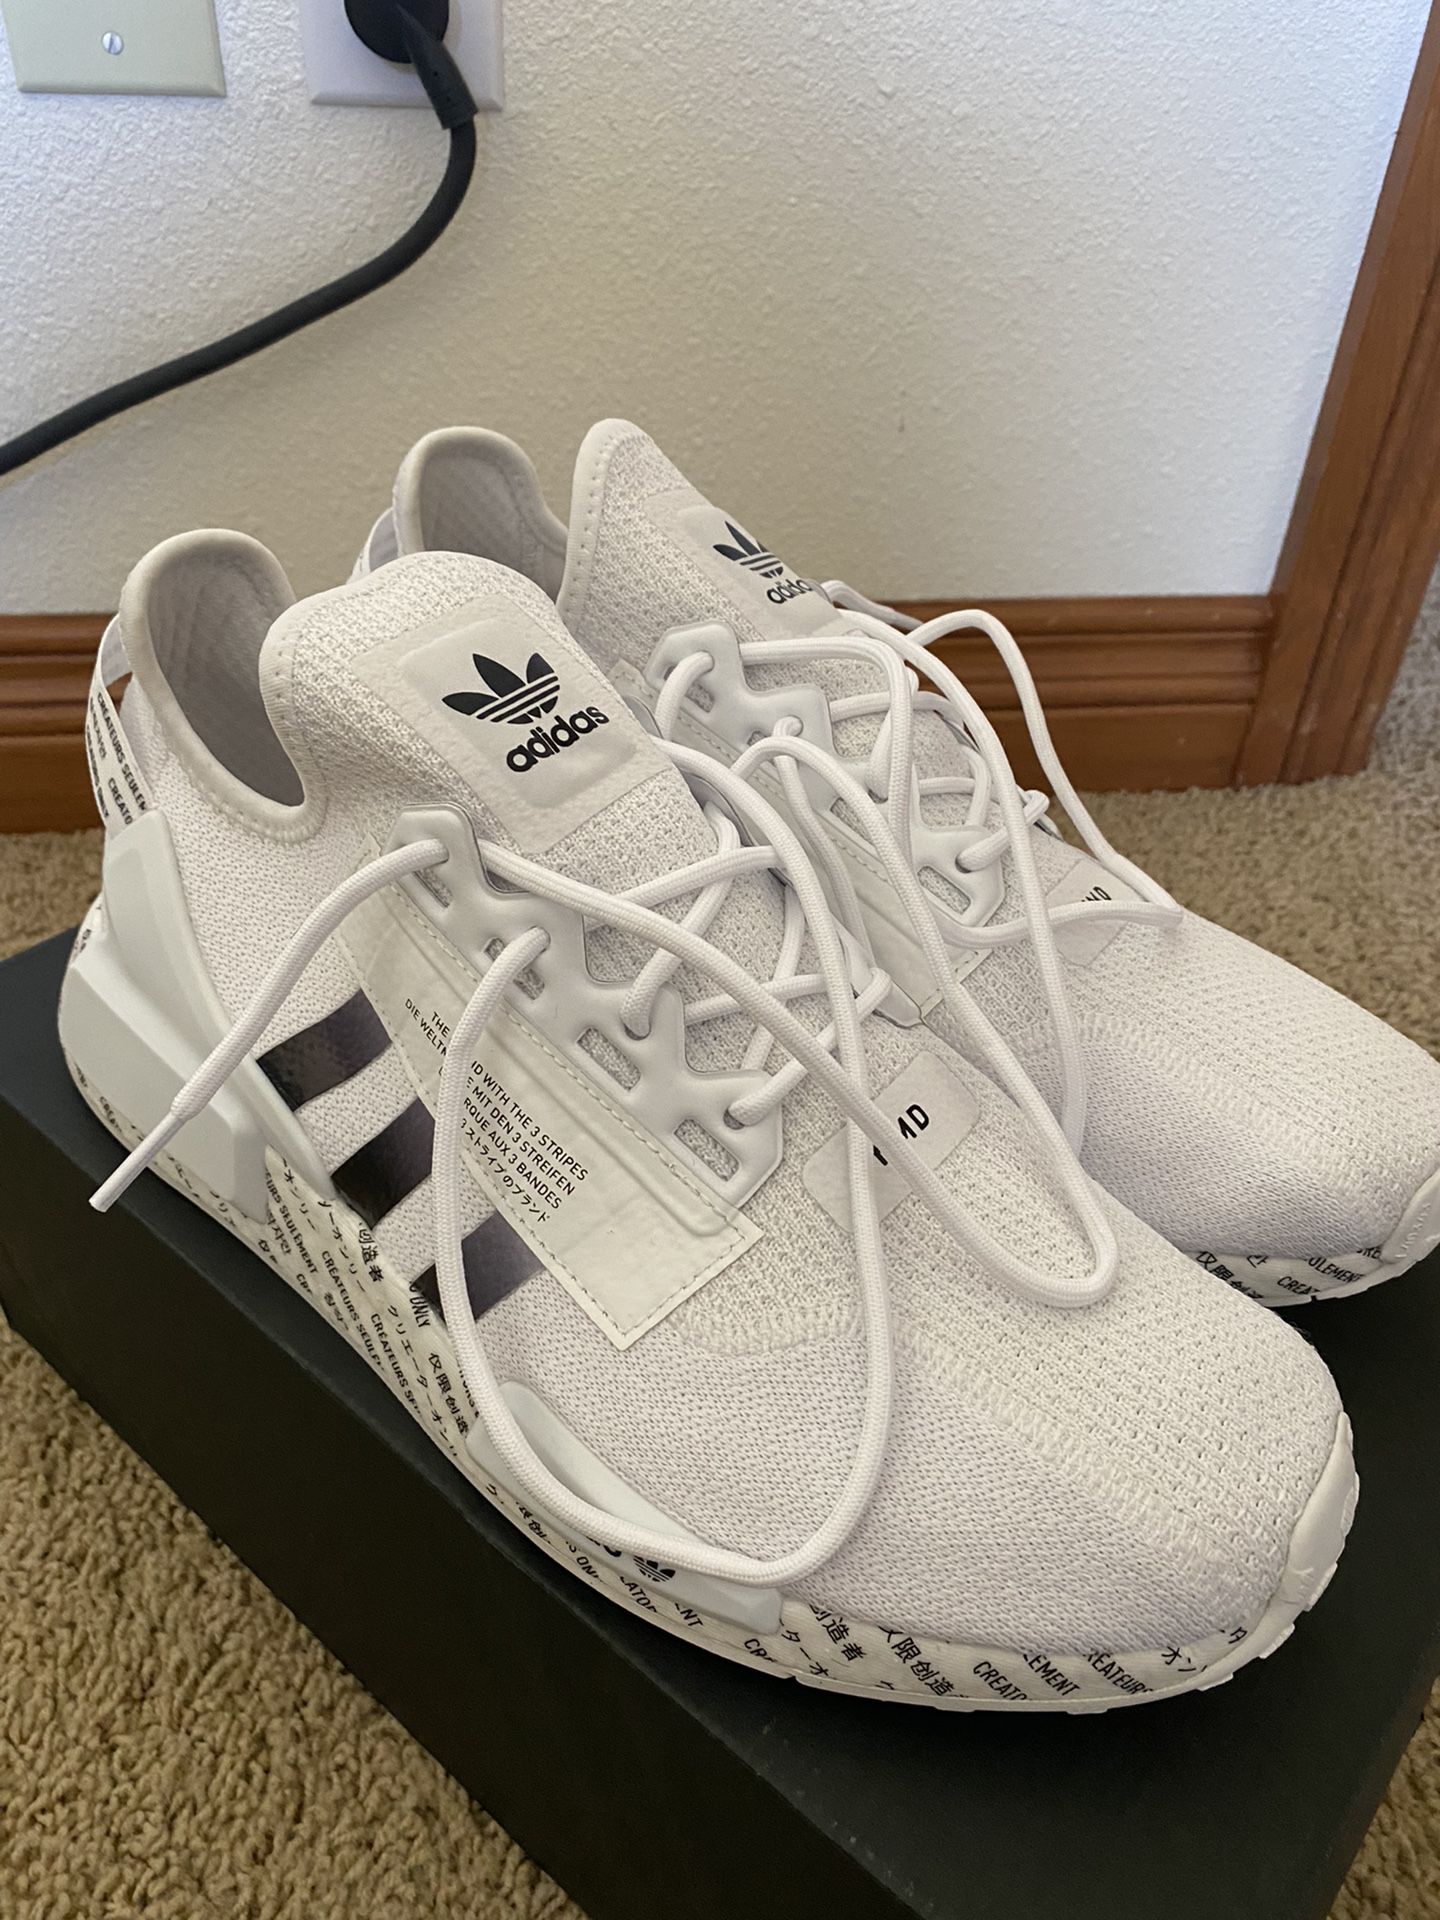 dobbelt Dripping melodramatiske Adidas NMD R1 for Sale in Vancouver, WA - OfferUp